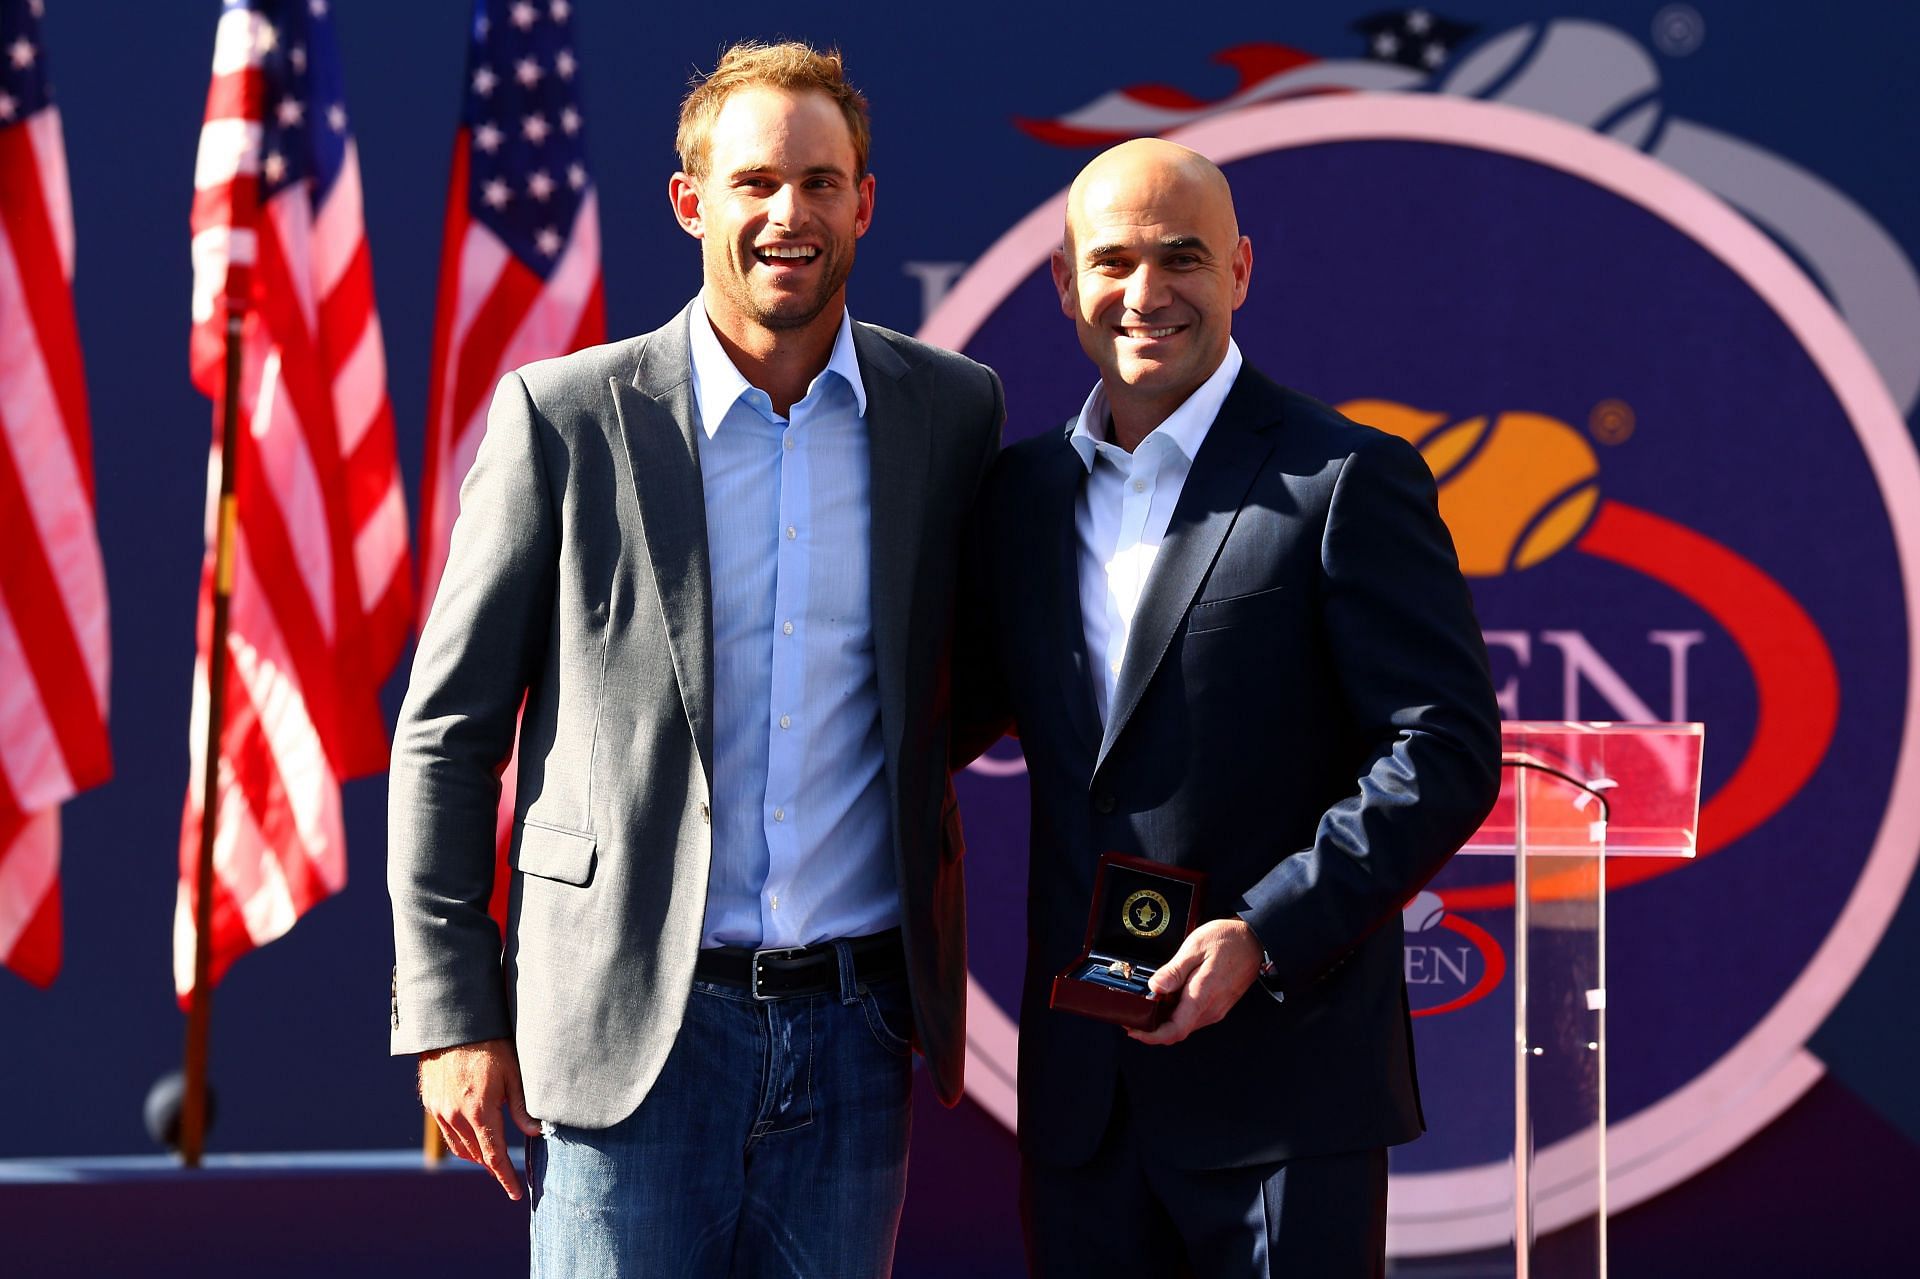 Andy Roddick and Andre Agassi at the 2012 US Open